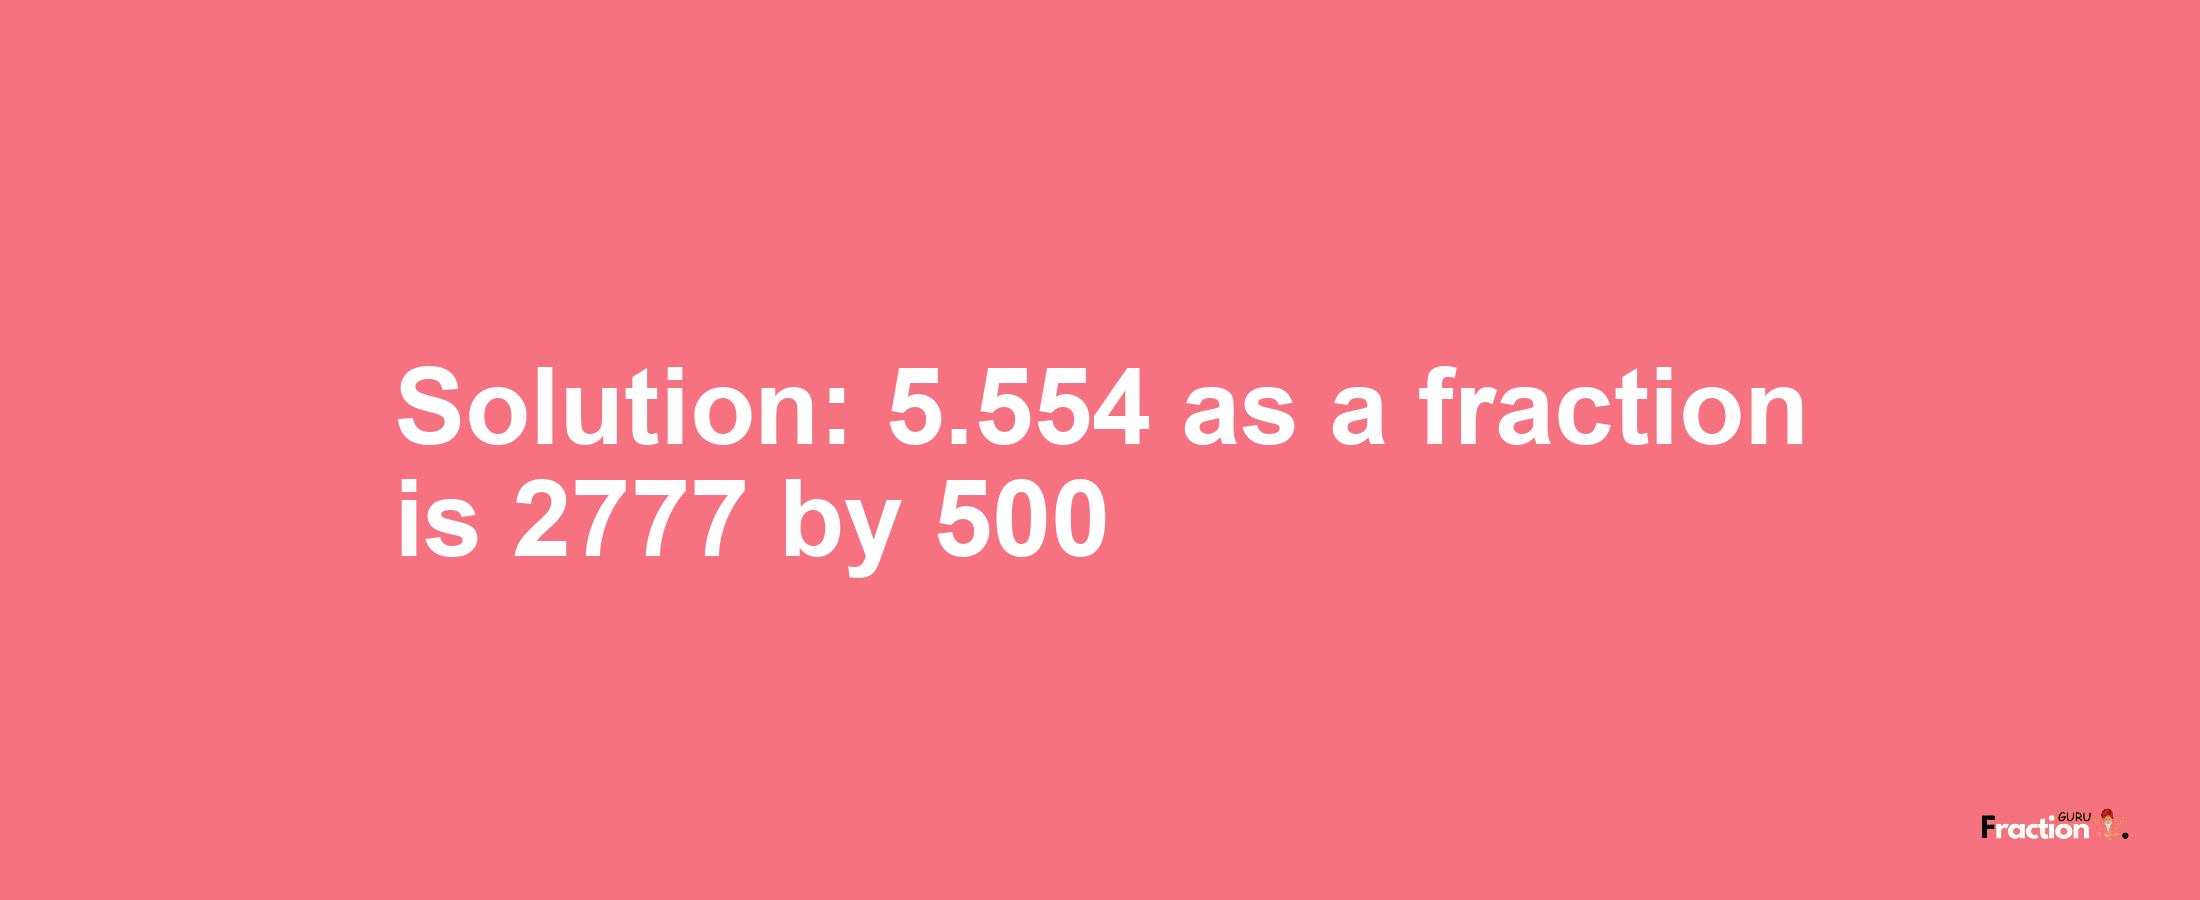 Solution:5.554 as a fraction is 2777/500